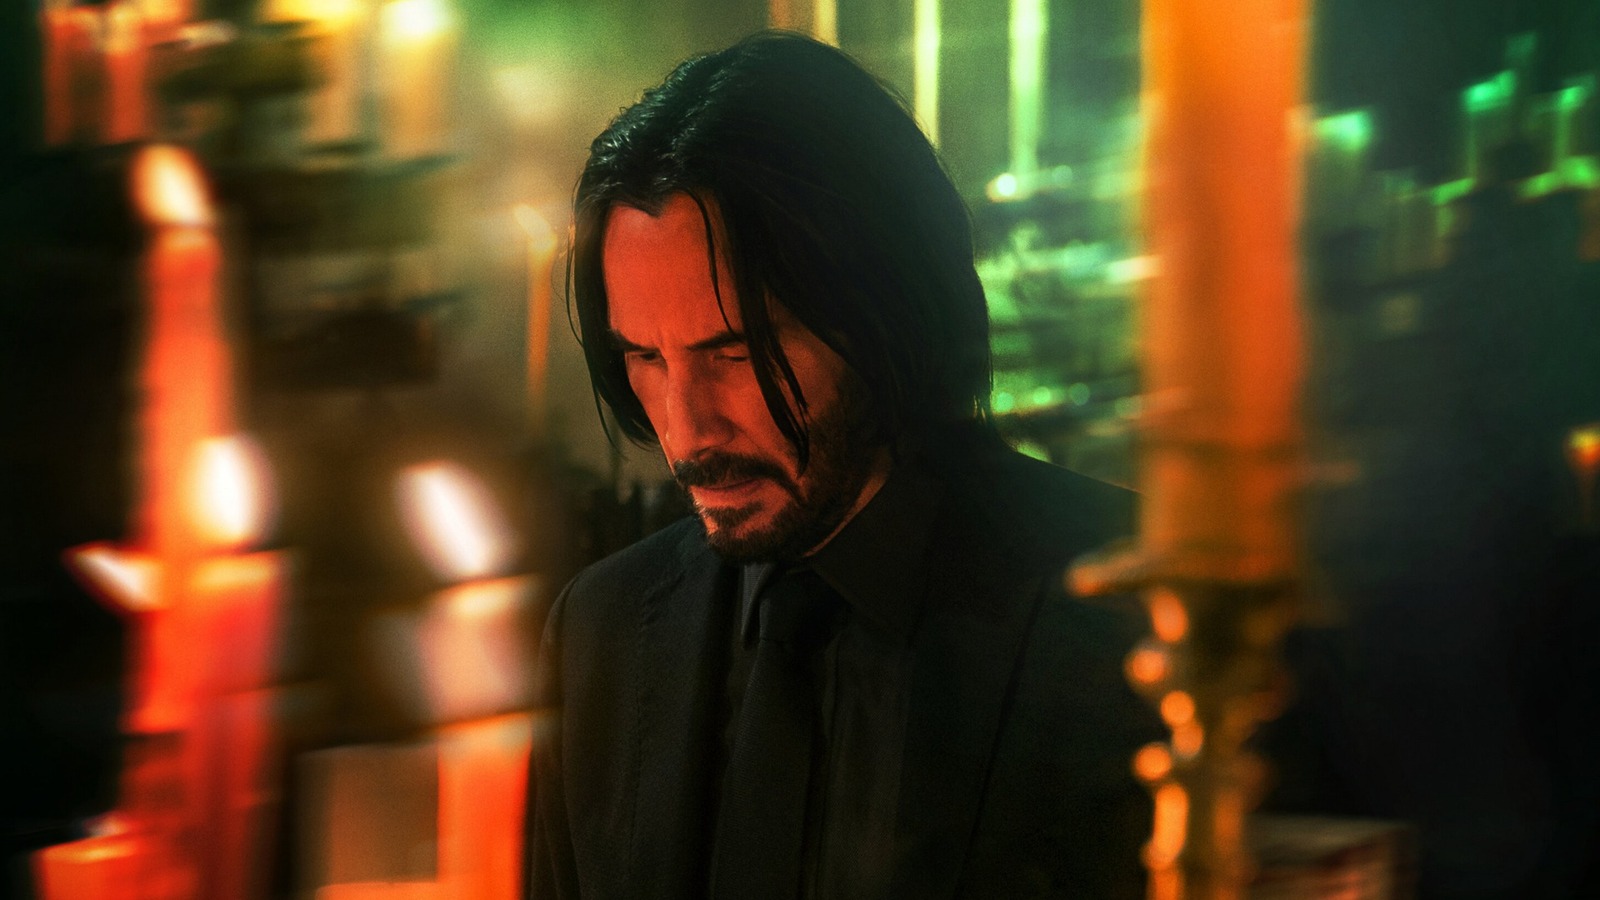 10. "The Meaning Behind John Wick's Blonde Hair" - wide 2